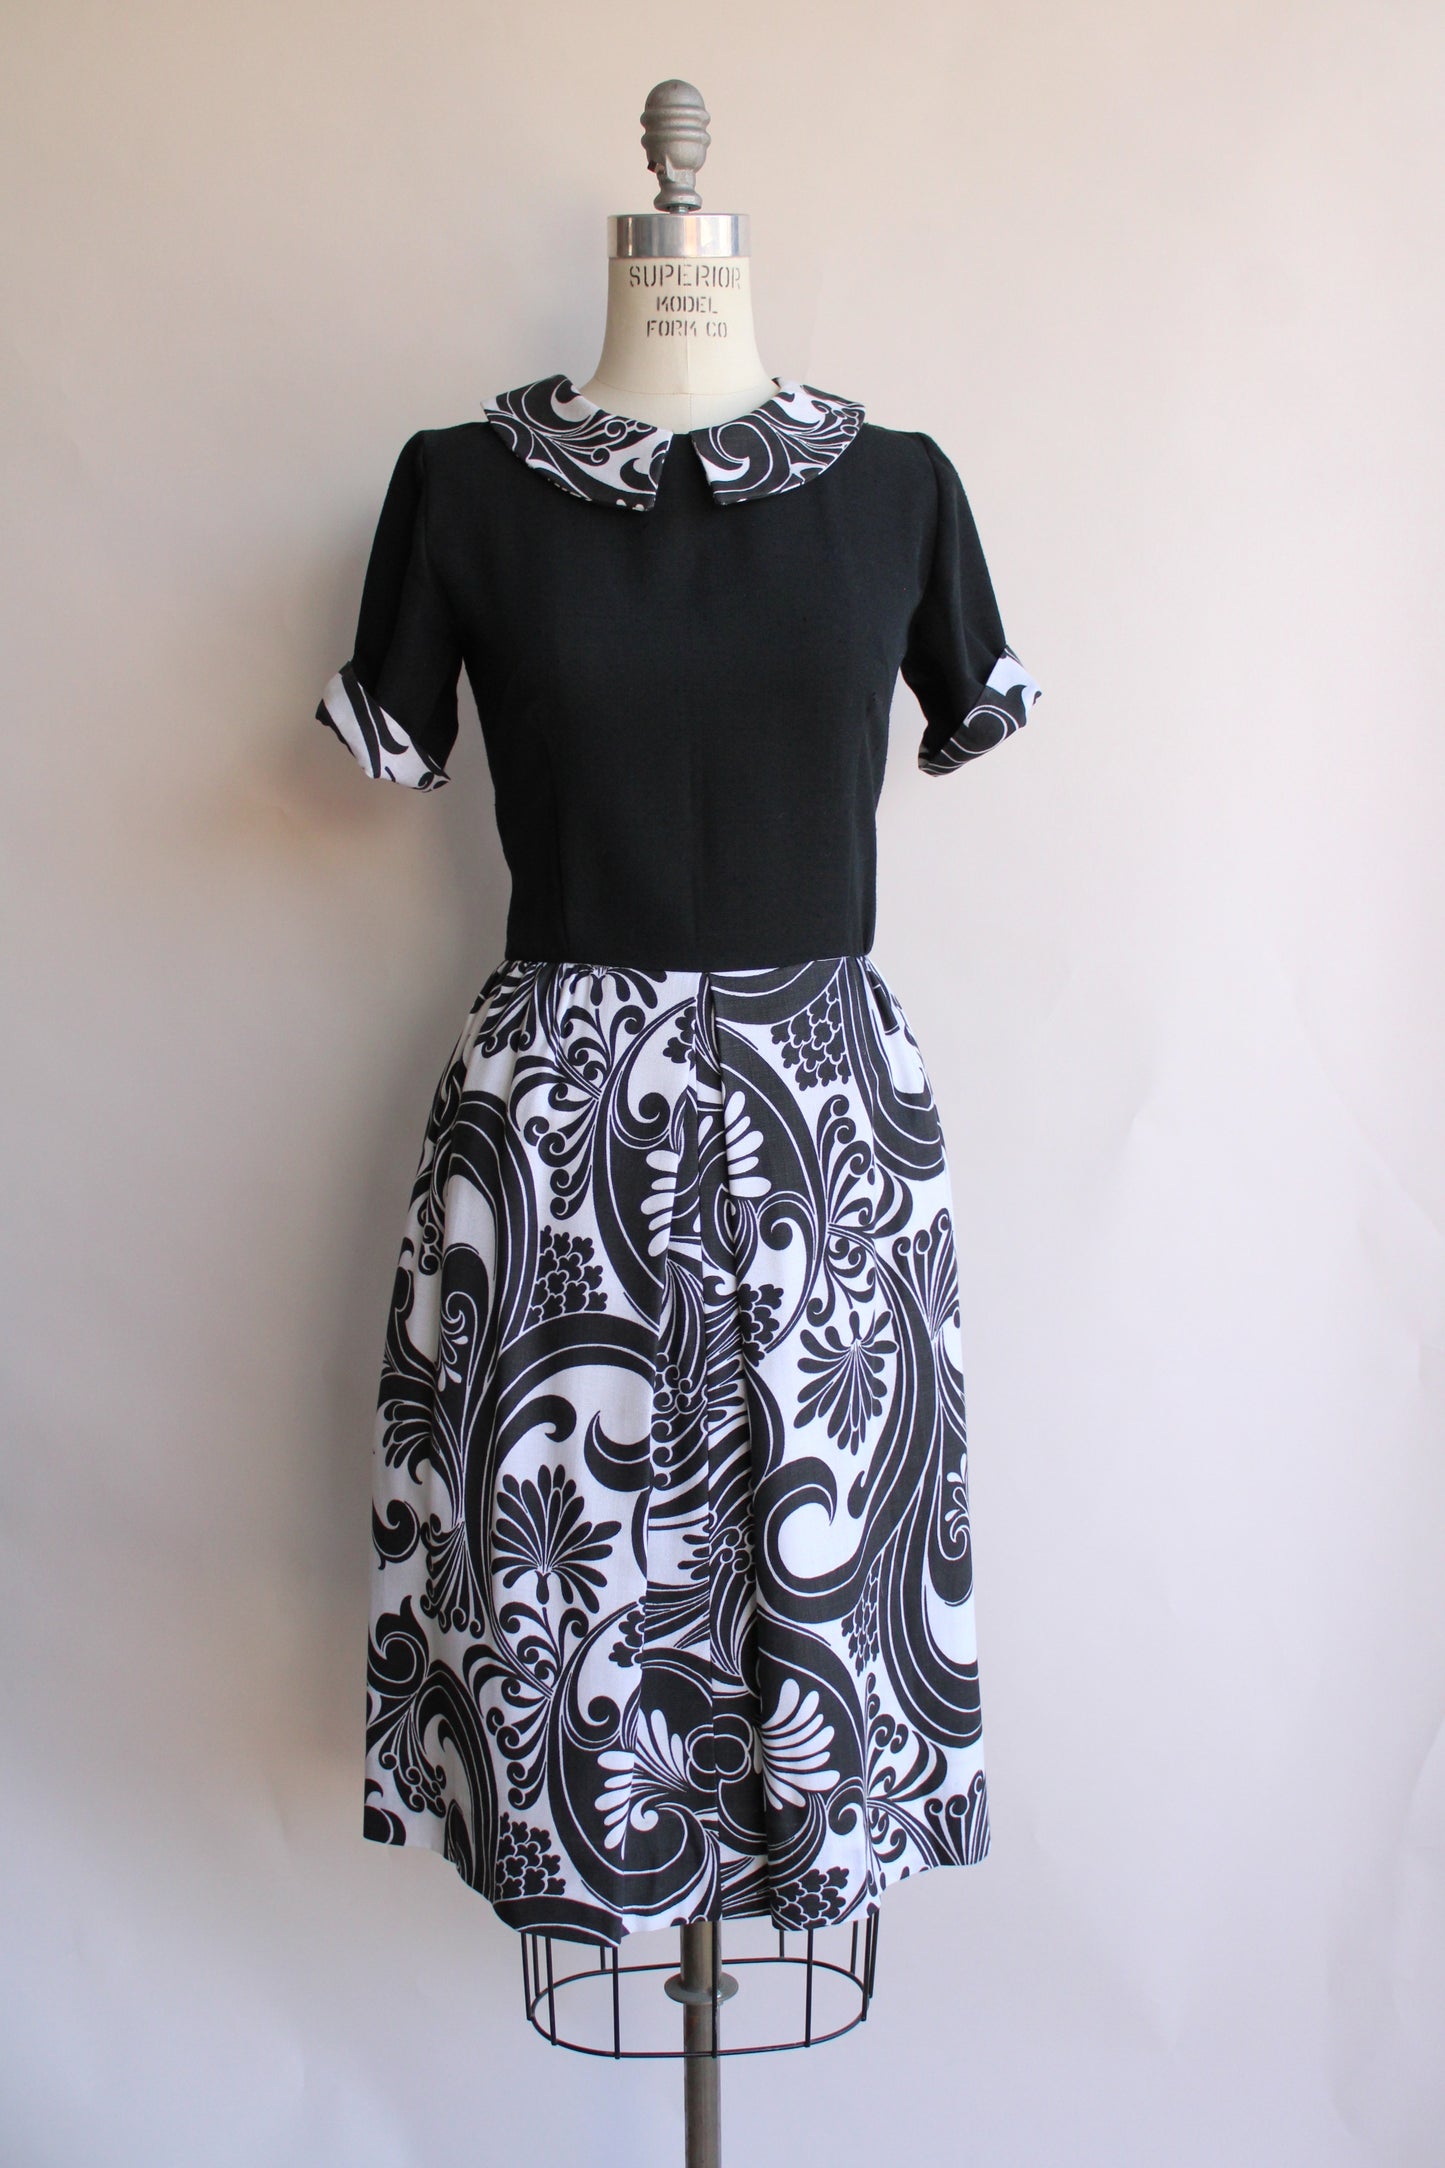 Vintage 1960s Black and White Dress with Peter Pan Collar